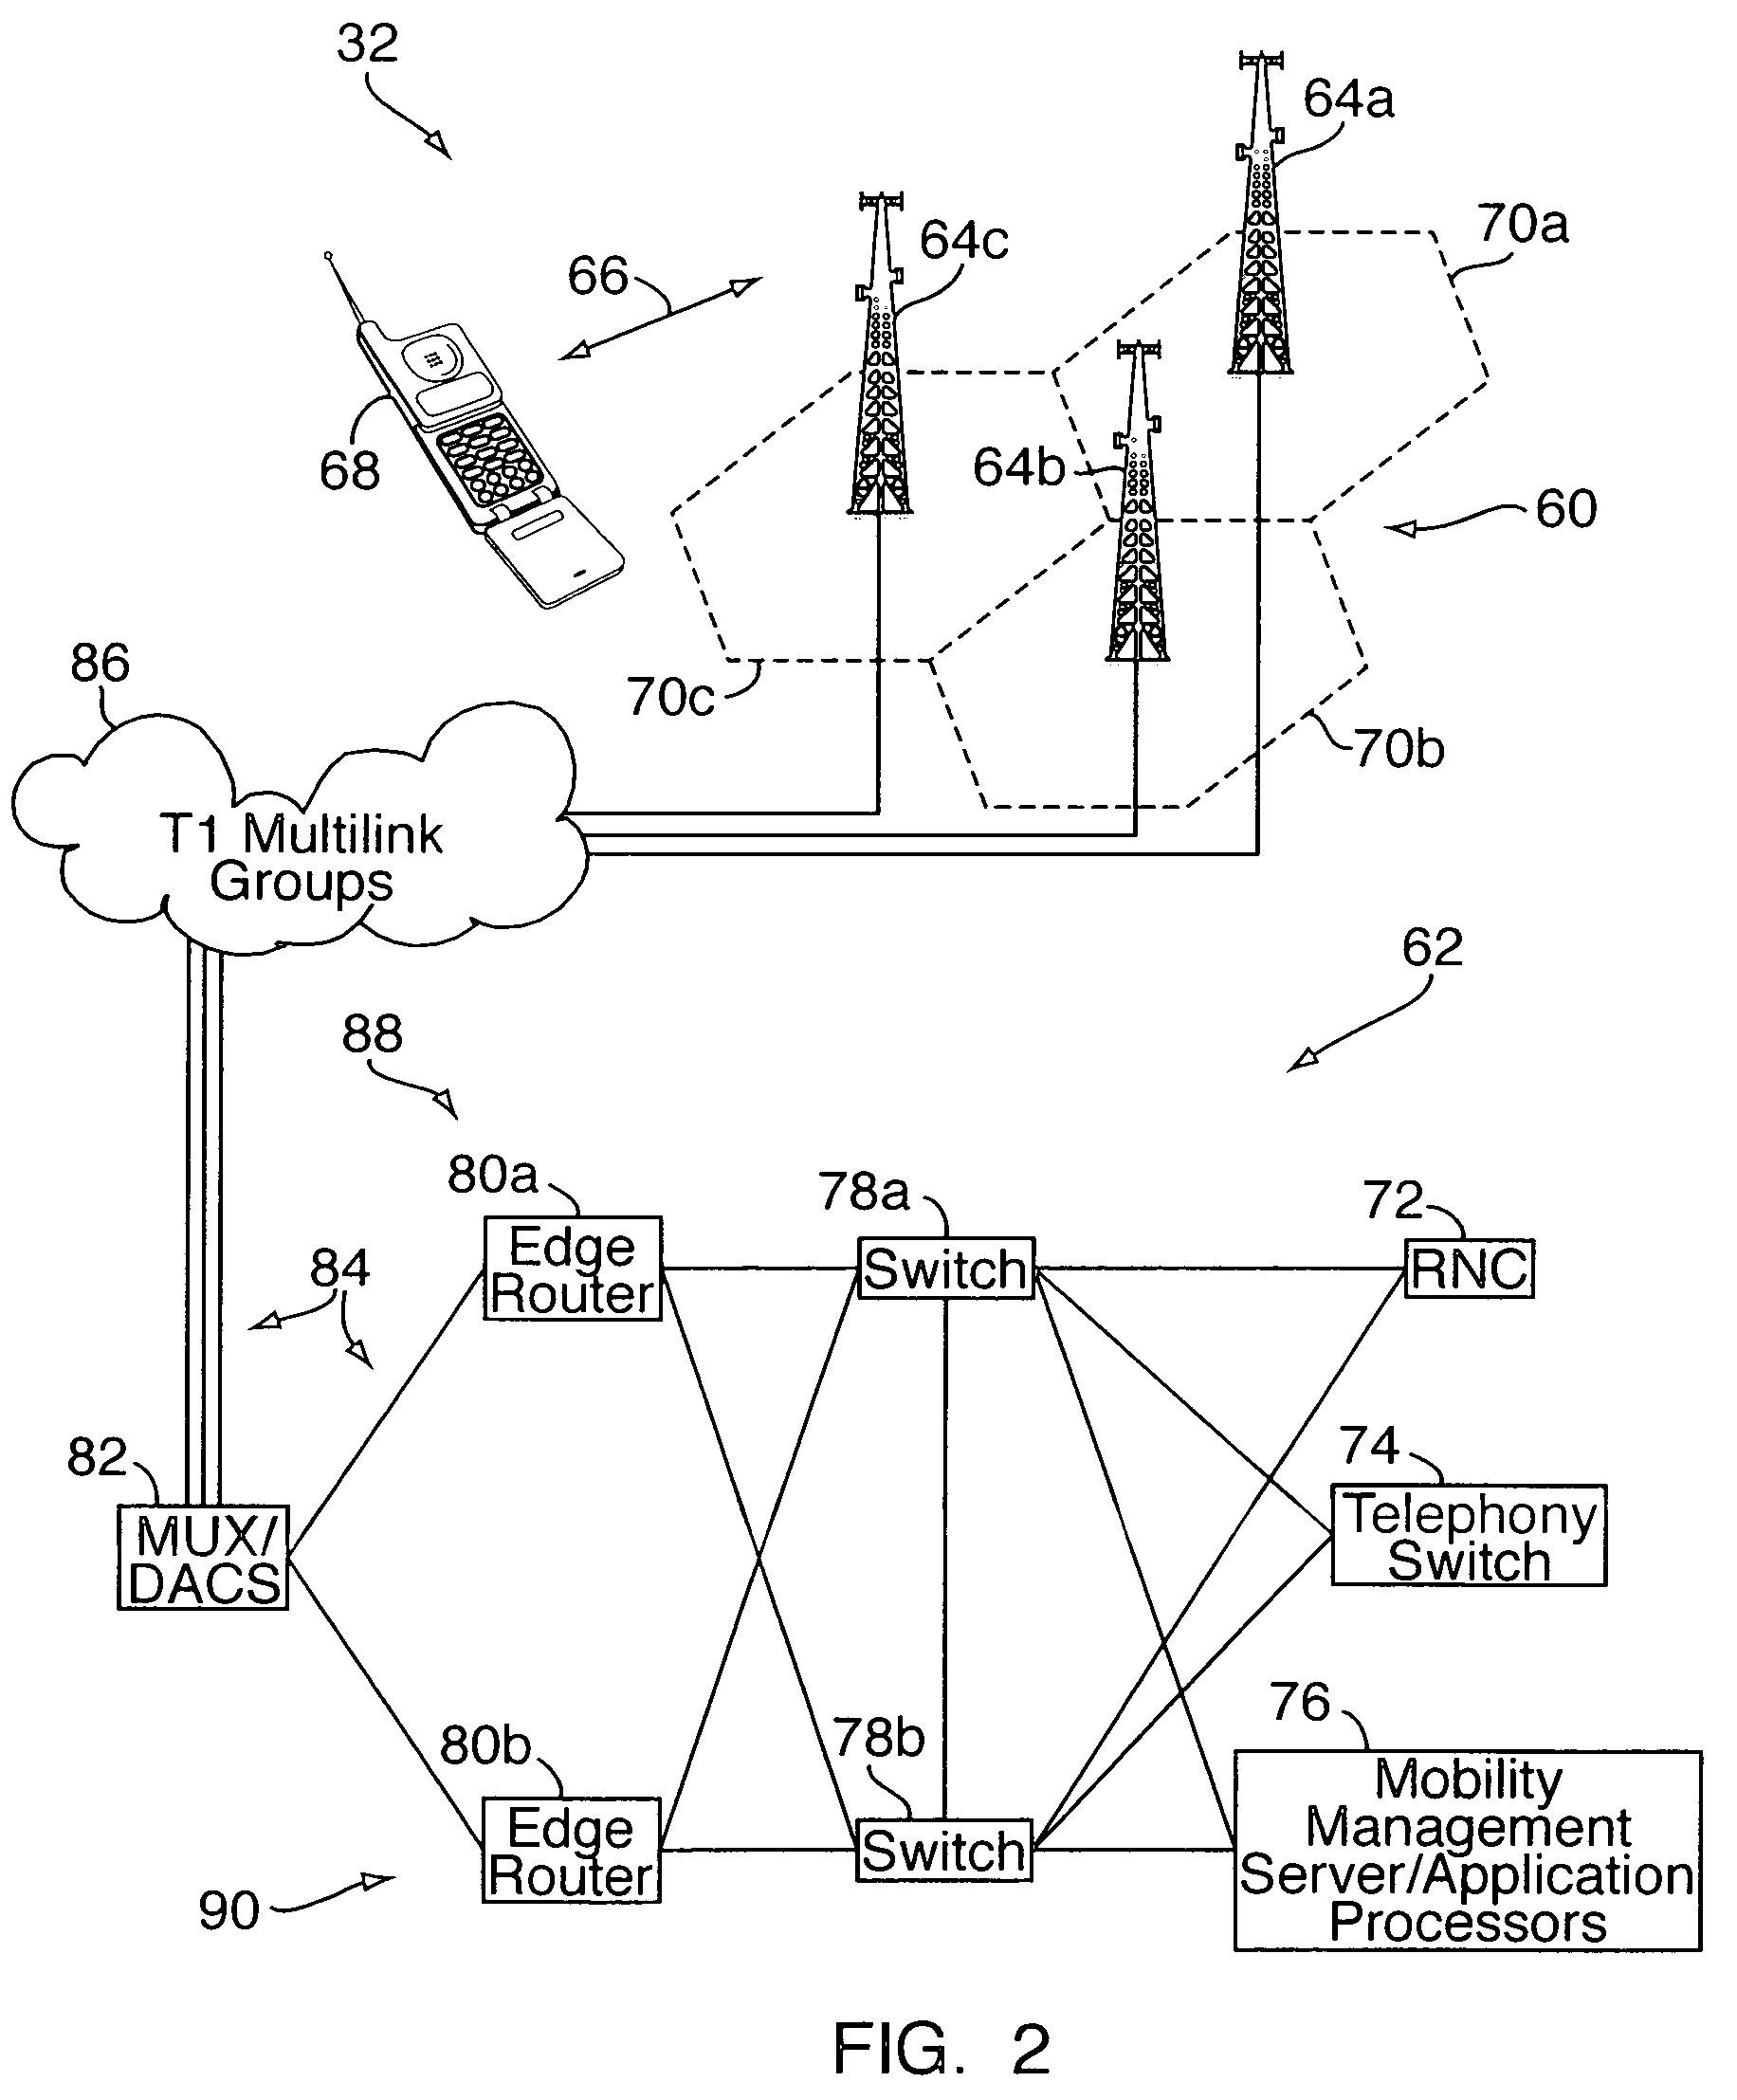 Method of maintaining traffic services through congestion caused by network failovers